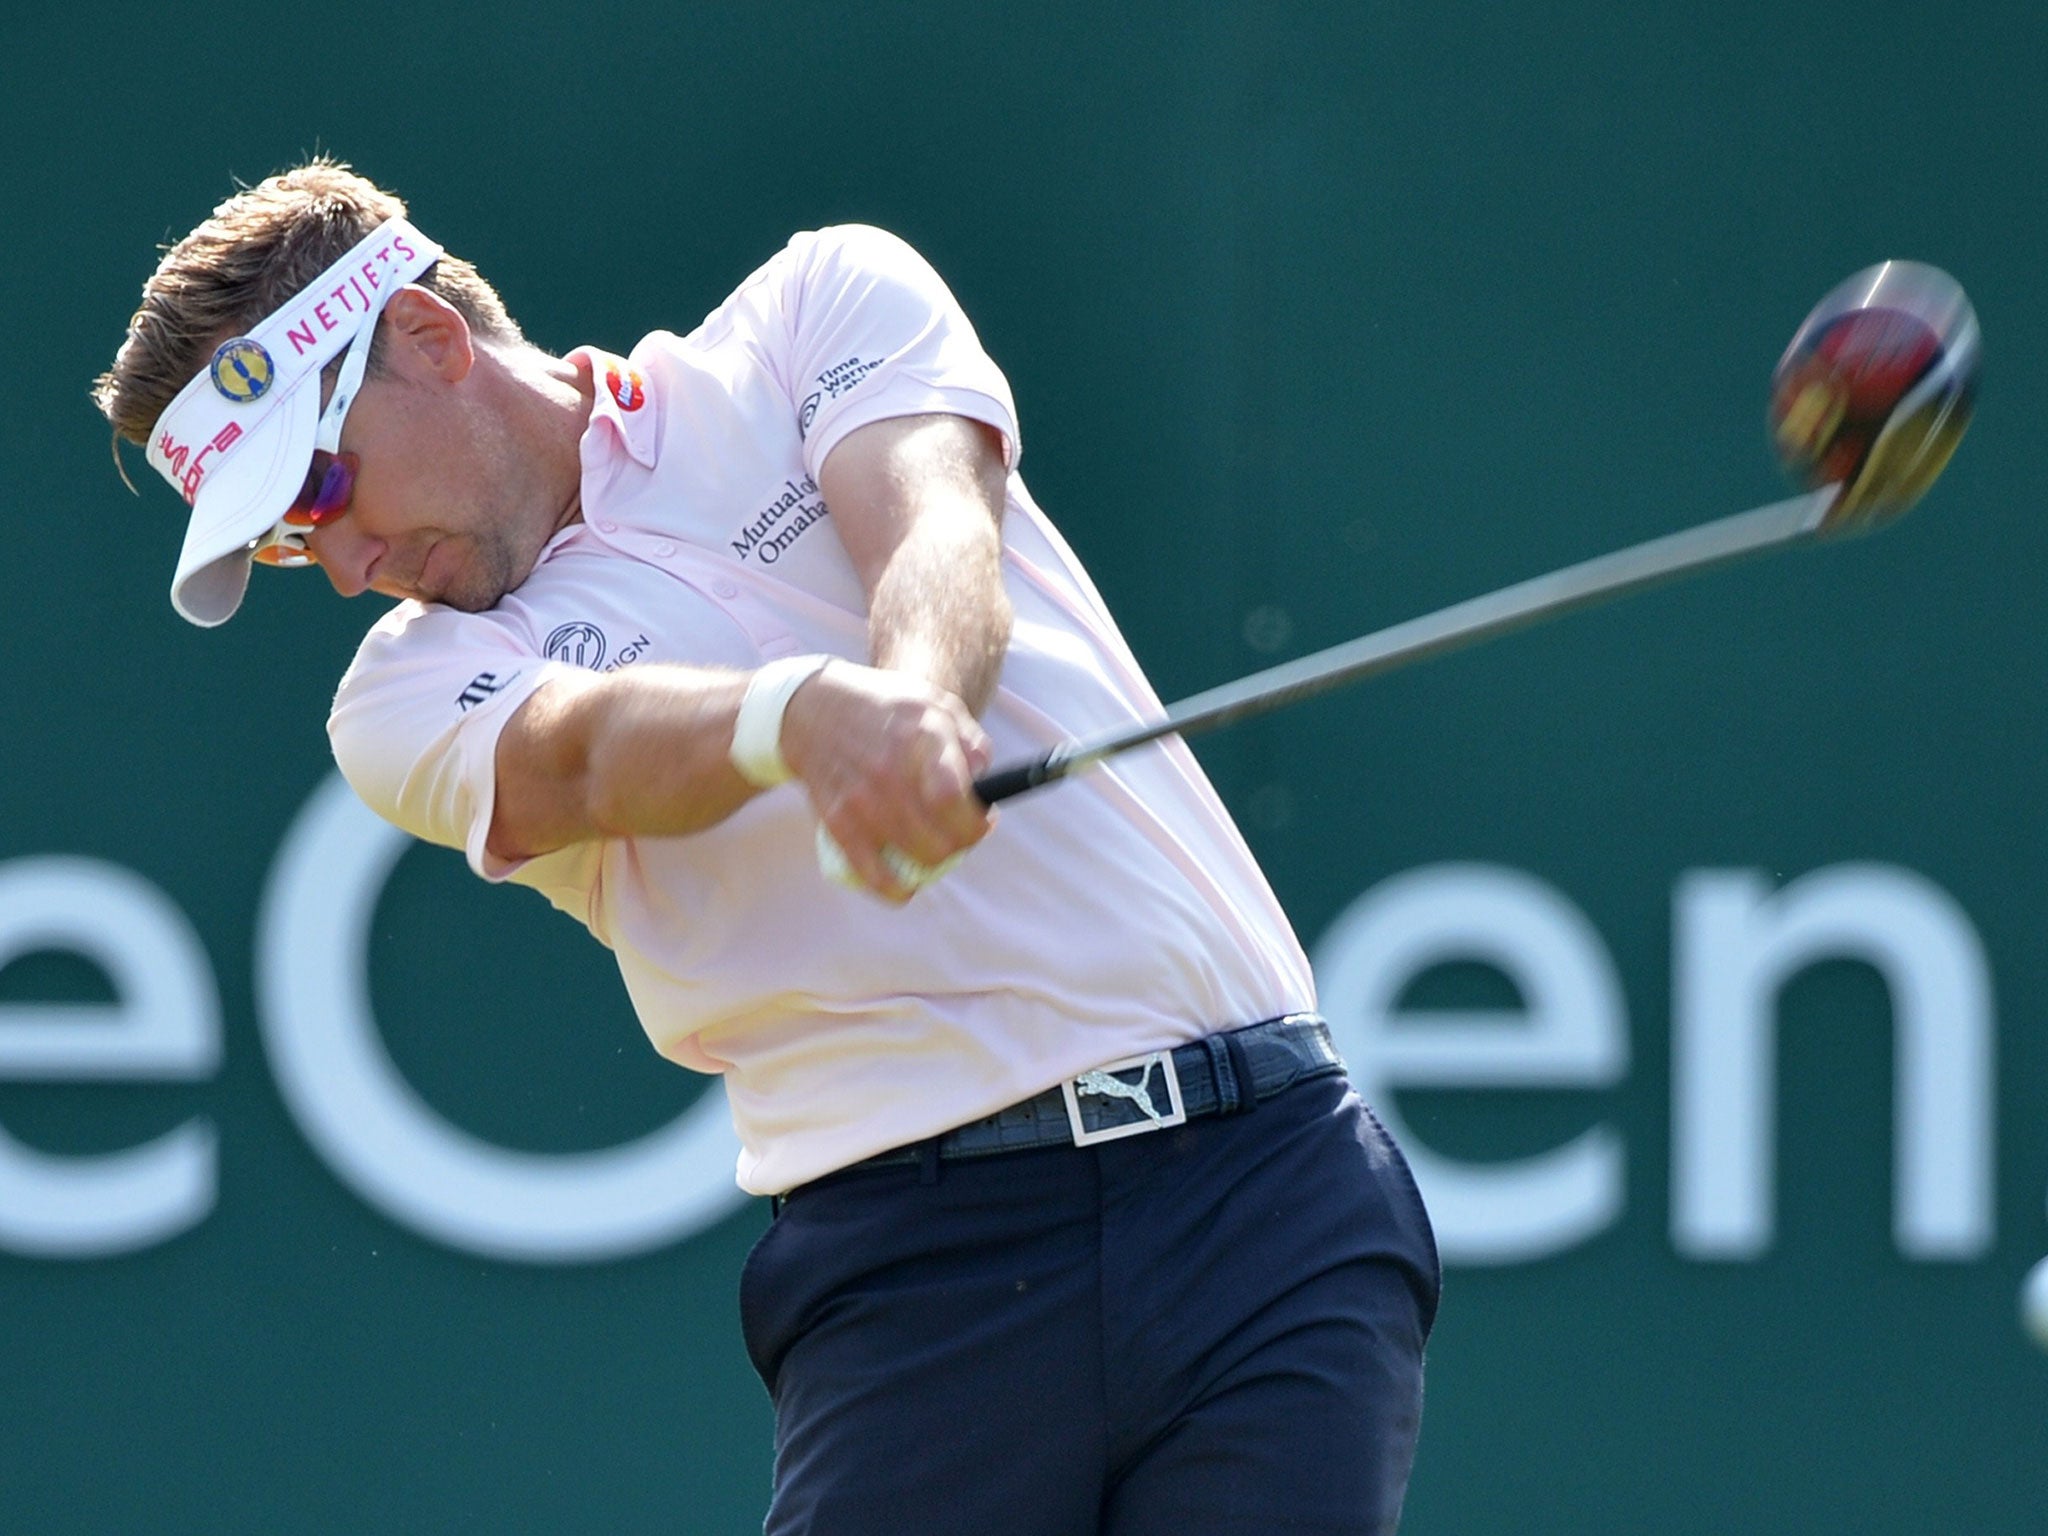 Ian Poulter plays from the 1st tee during his first round at Royal Liverpool yesterday